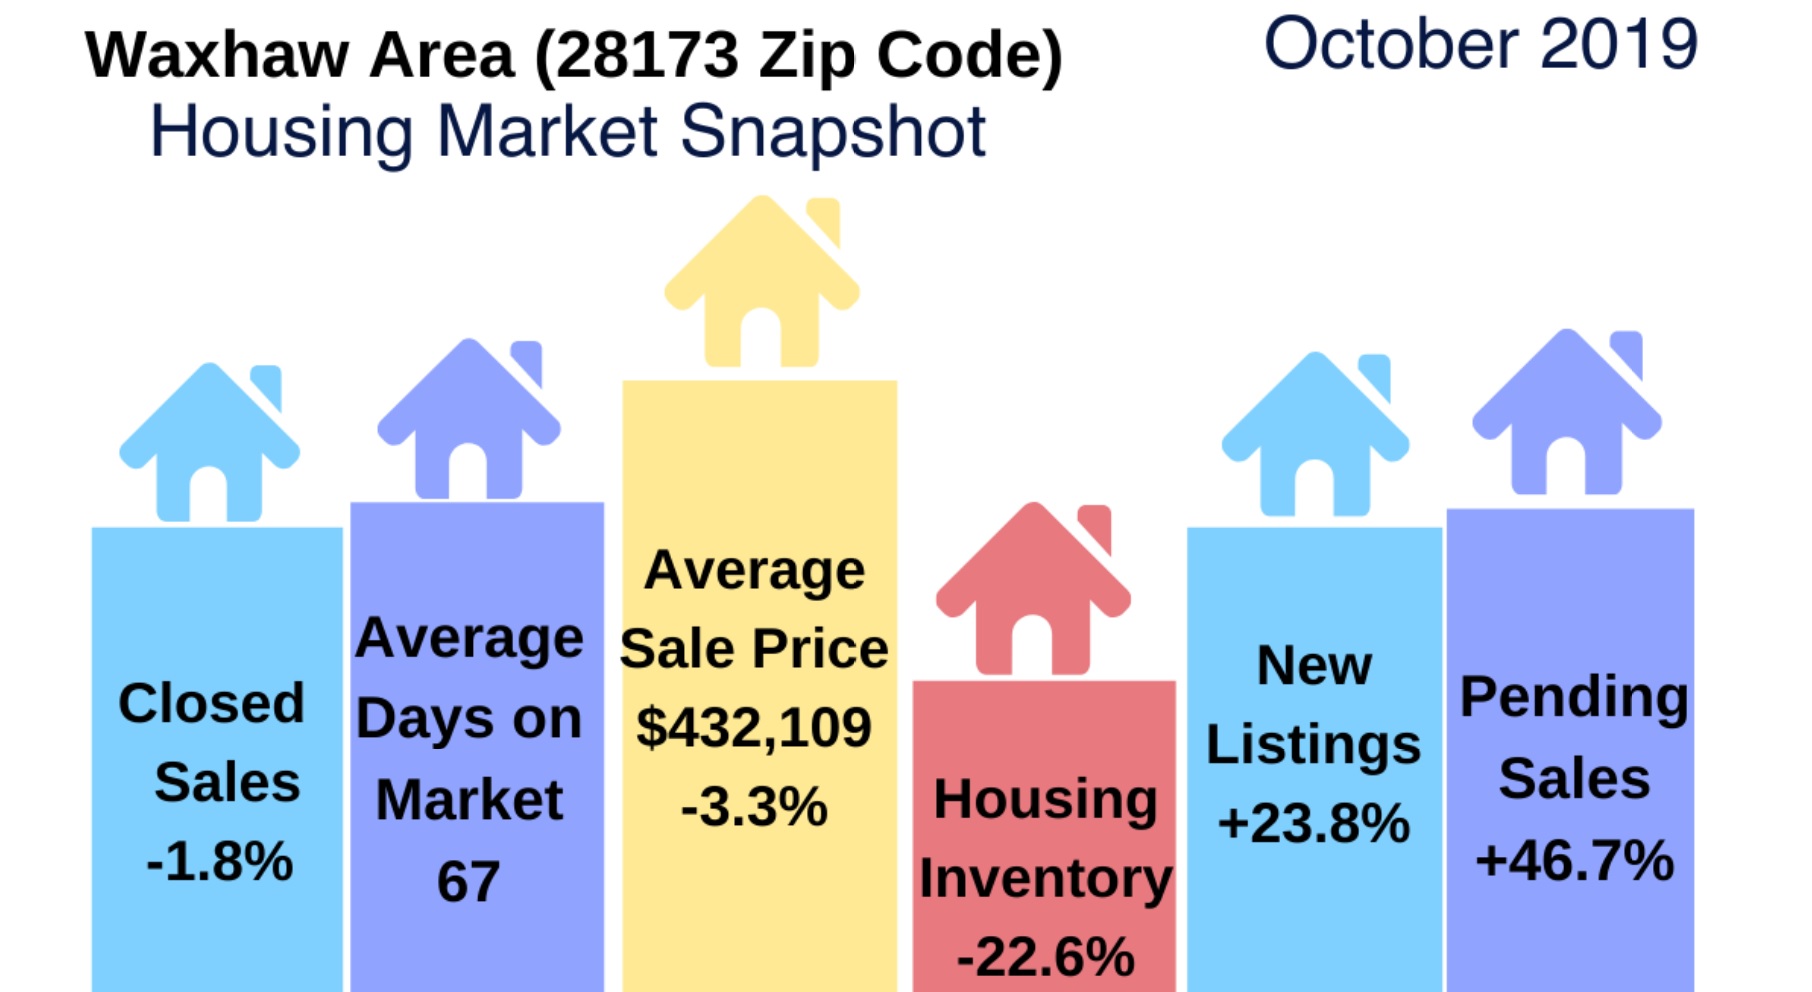 Waxhaw Area Real Estate Report: October 2019